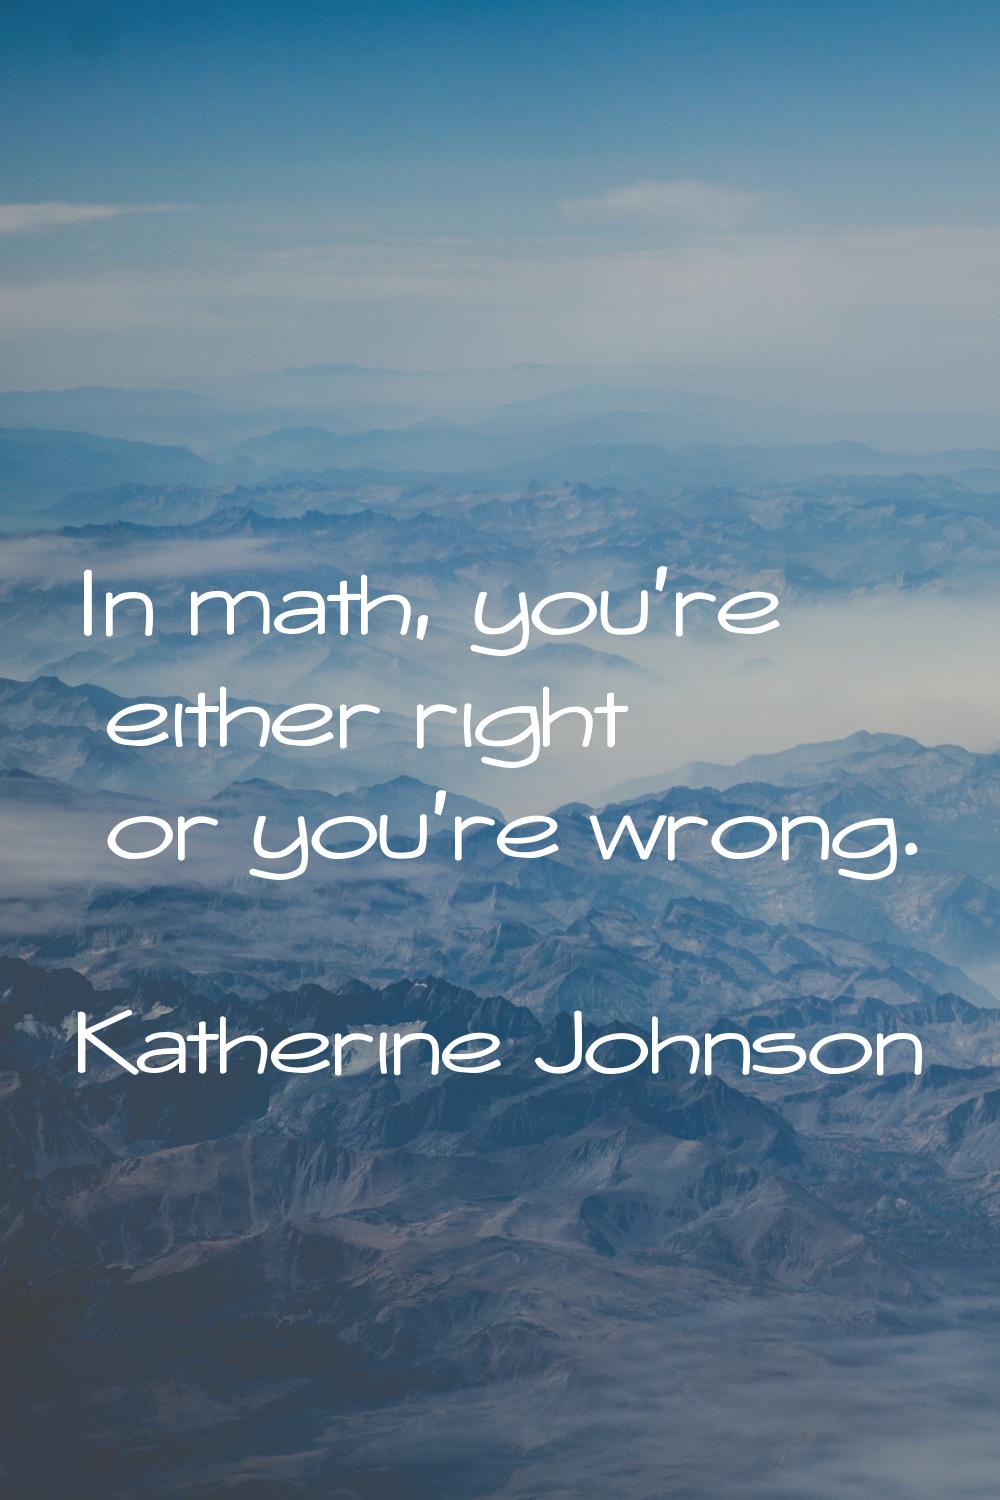 In math, you're either right or you're wrong.